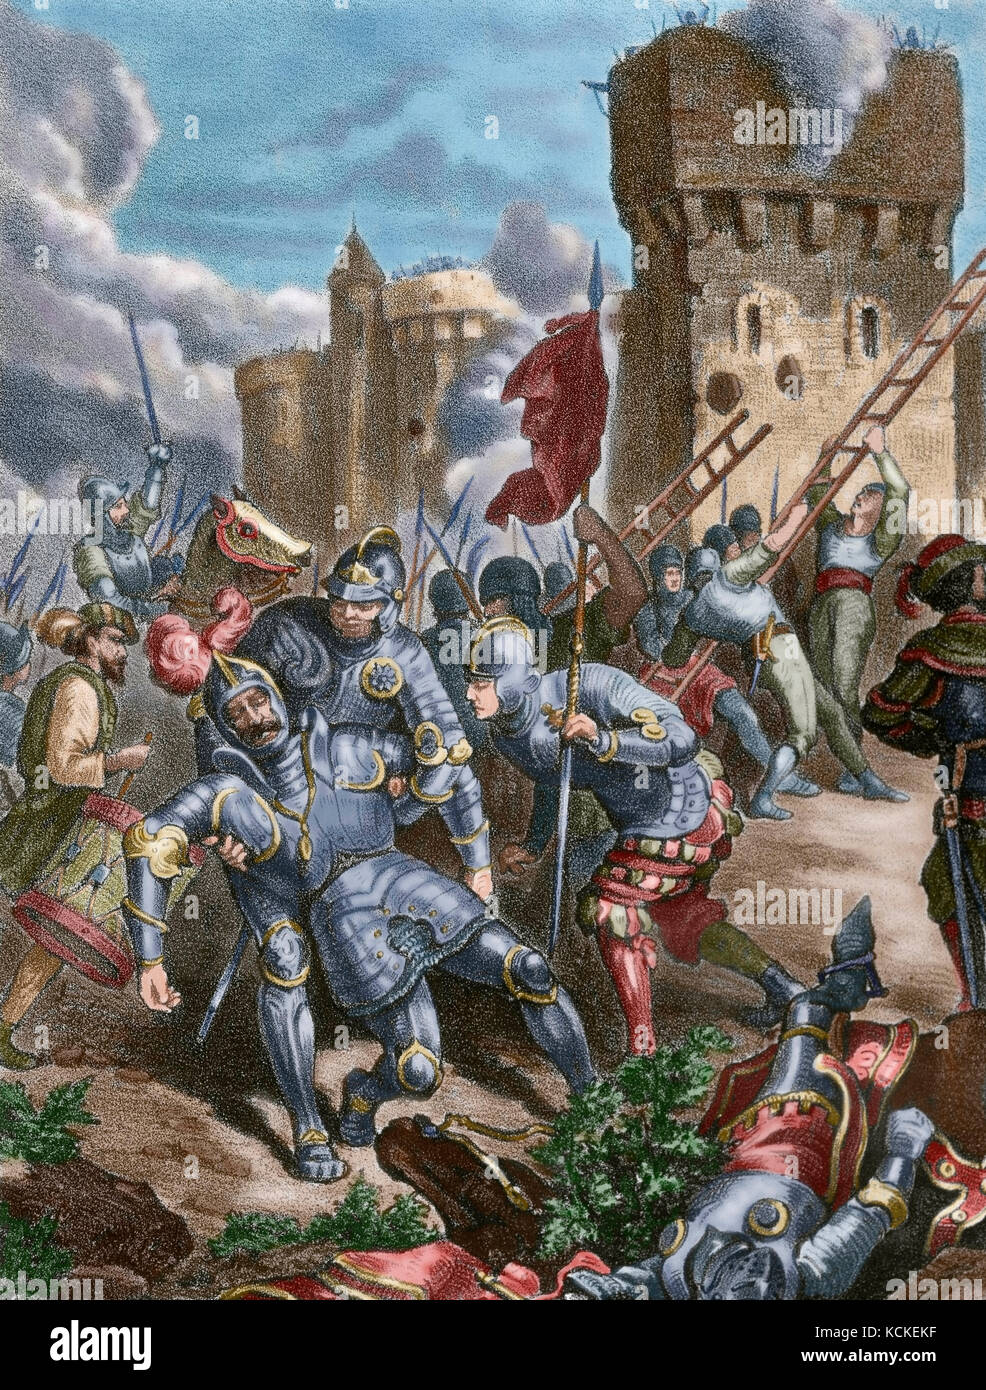 War of the League of Cognac (1526-1530). Sack of Rome on 6 May, 1527. Military event carried out by the troops of Holy Roman emperor Charles V (1500-1558). Charles III, Duke of Bourbon (1490-1527) and Constable of France, was in command of the imperial soldiers. His troops took the city and sacked it. Death of the Constable in the assault to Rome. Engraving. Colored. Stock Photo